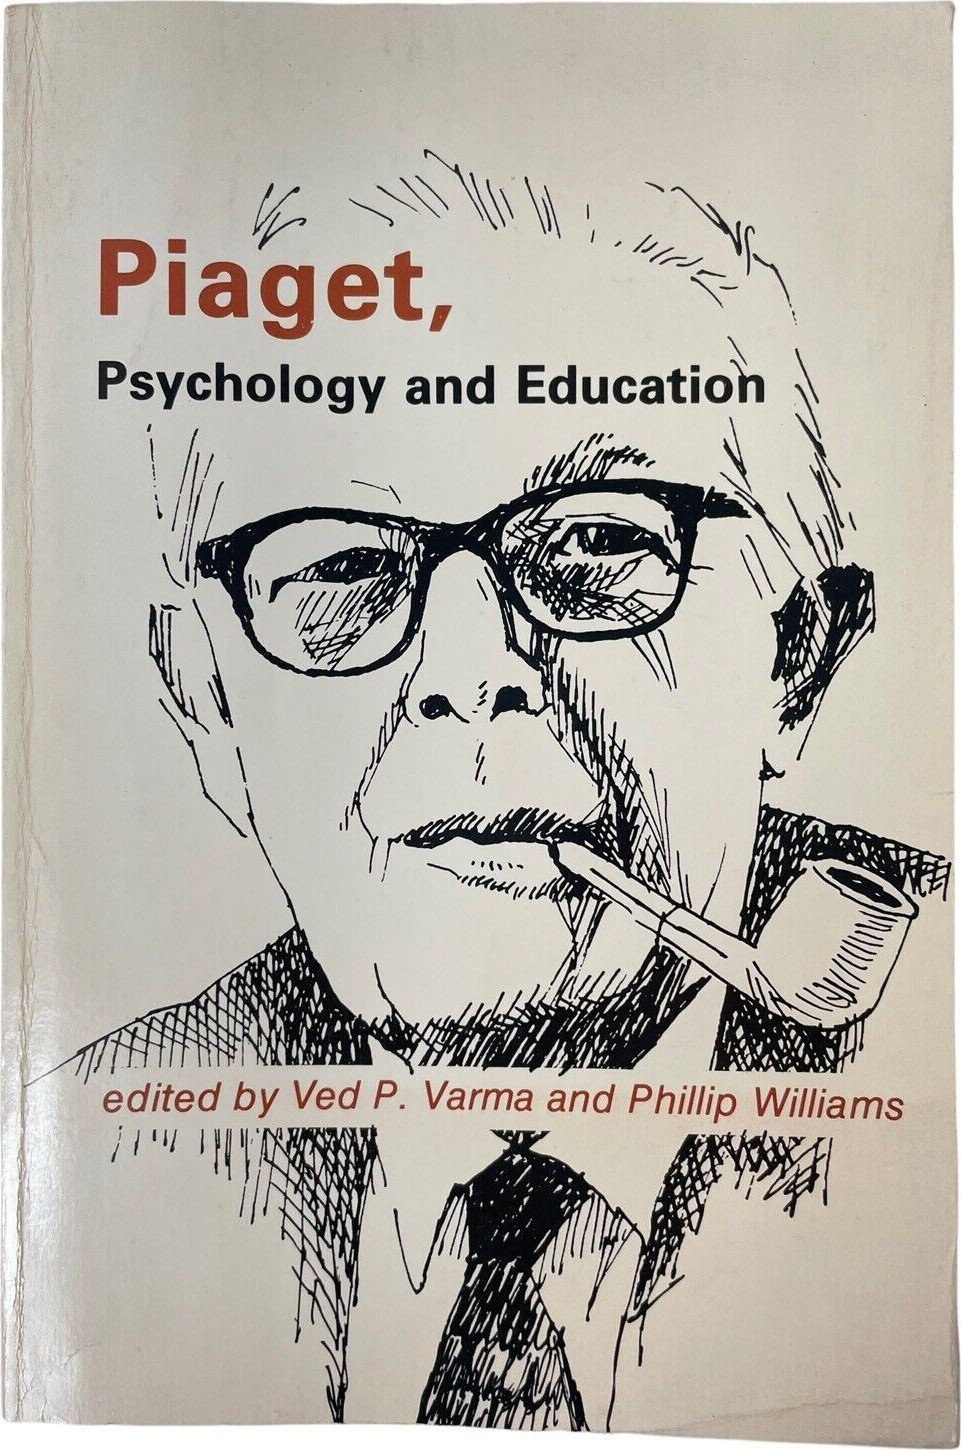 Piaget, Psychology and Education: Papers in Honour of Jean Piaget